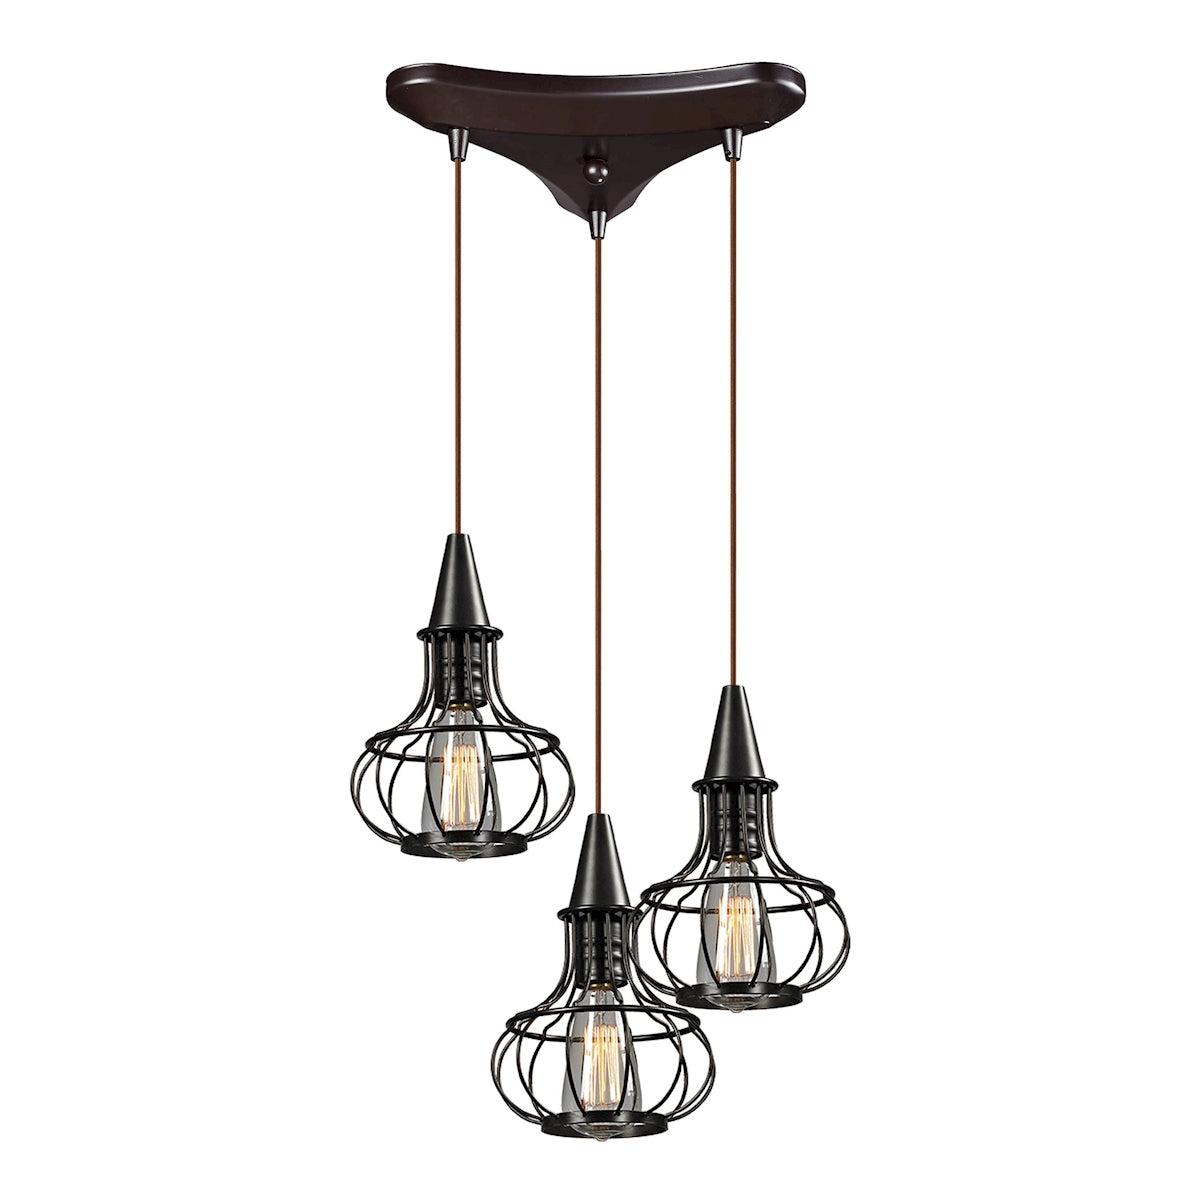 ELK Lighting 14191/3 Yardley 3-Light Triangular Pendant Fixture in Oil Rubbed Bronze with Wire Cages